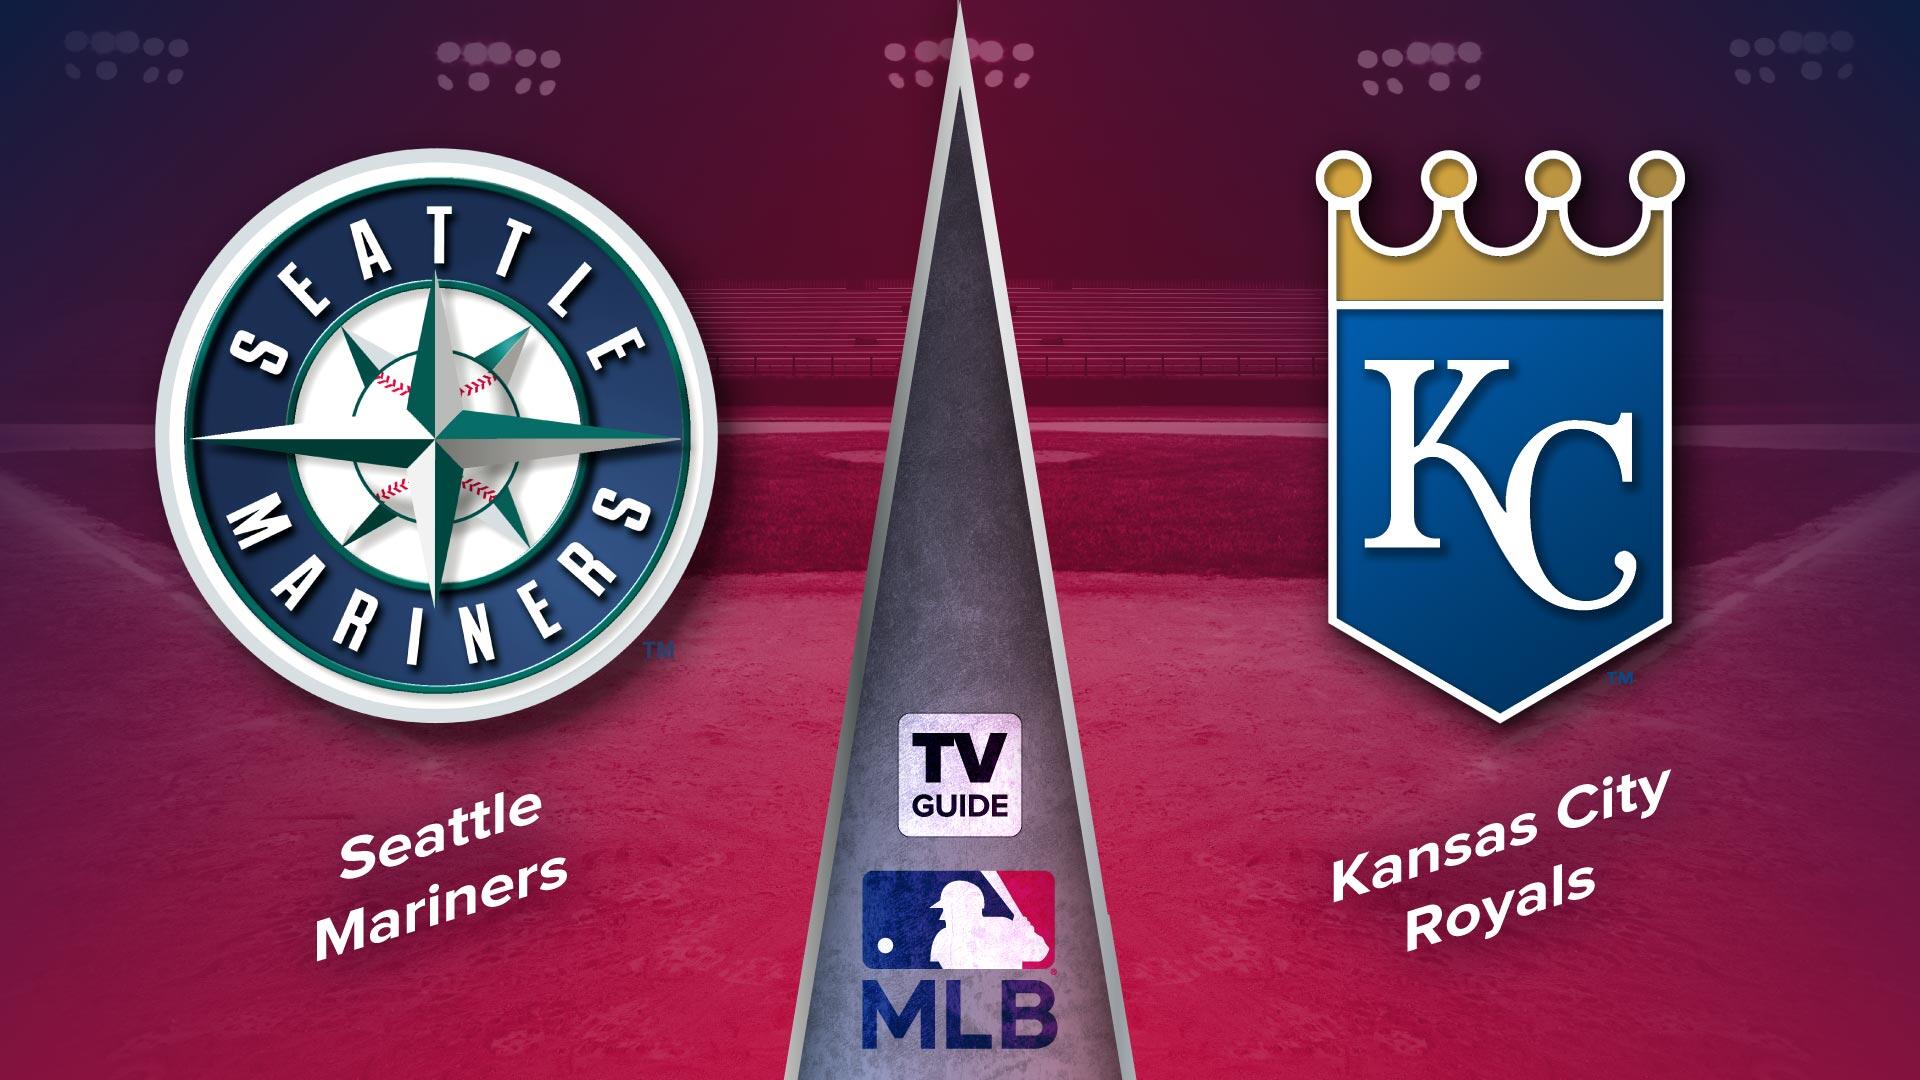 How to Watch the Mariners vs. Royals Game: Streaming & TV Info